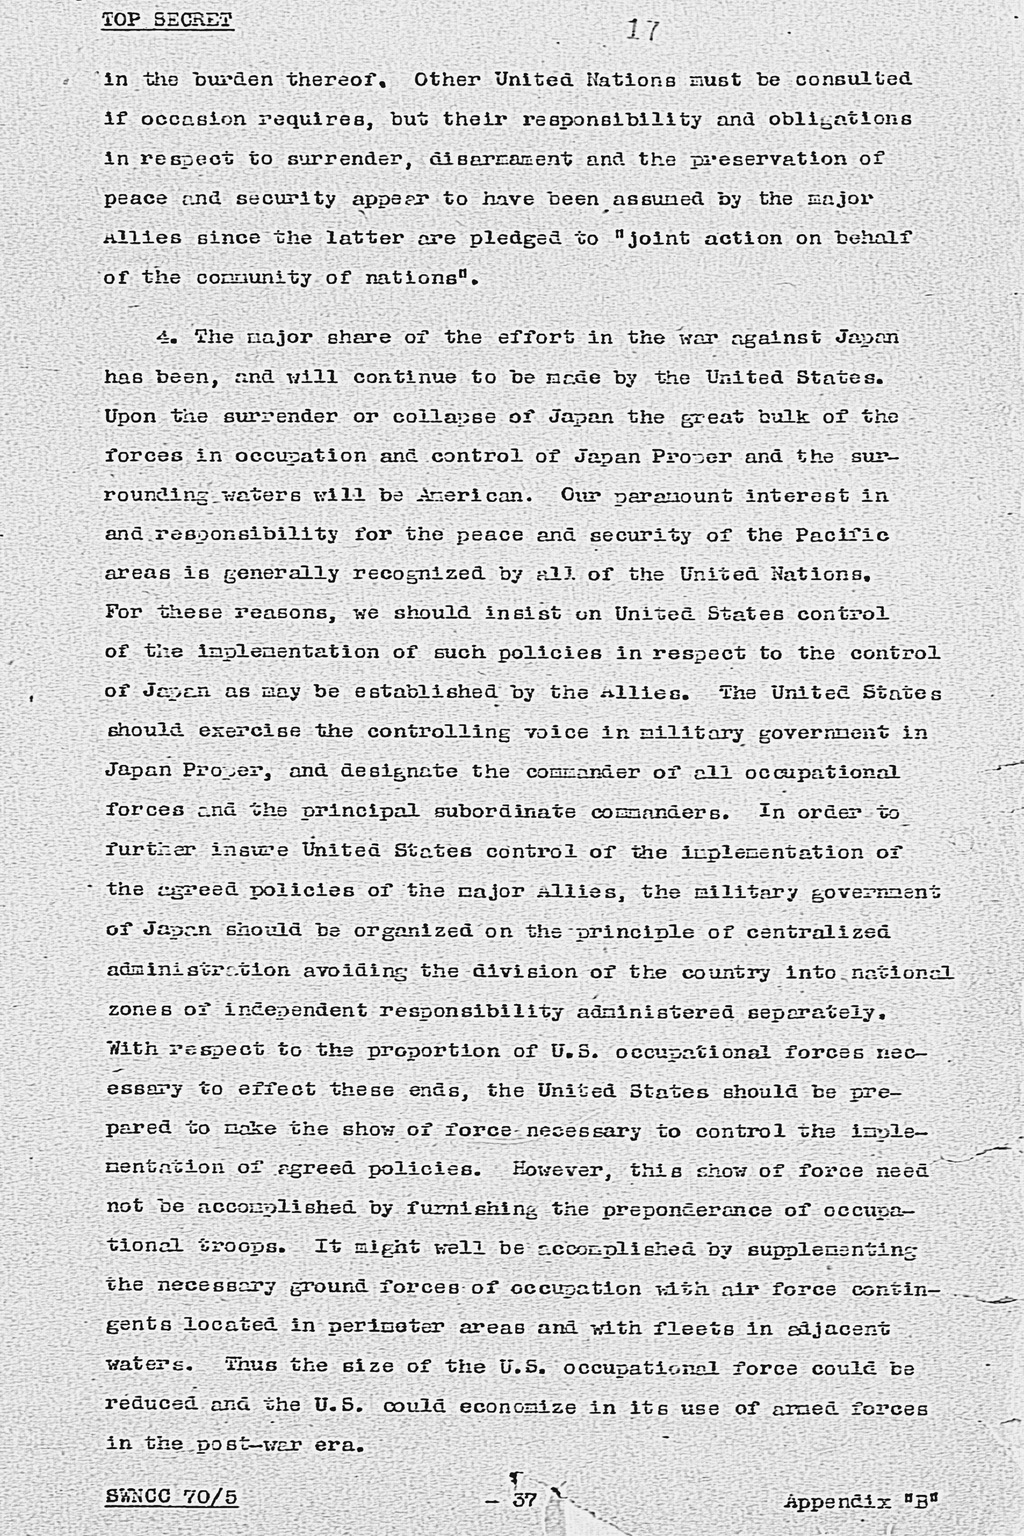 『Memorandum for the President, Subject: National Composition of Forces to Occupy Japan Proper to the Post-Defeat Period』(拡大画像)